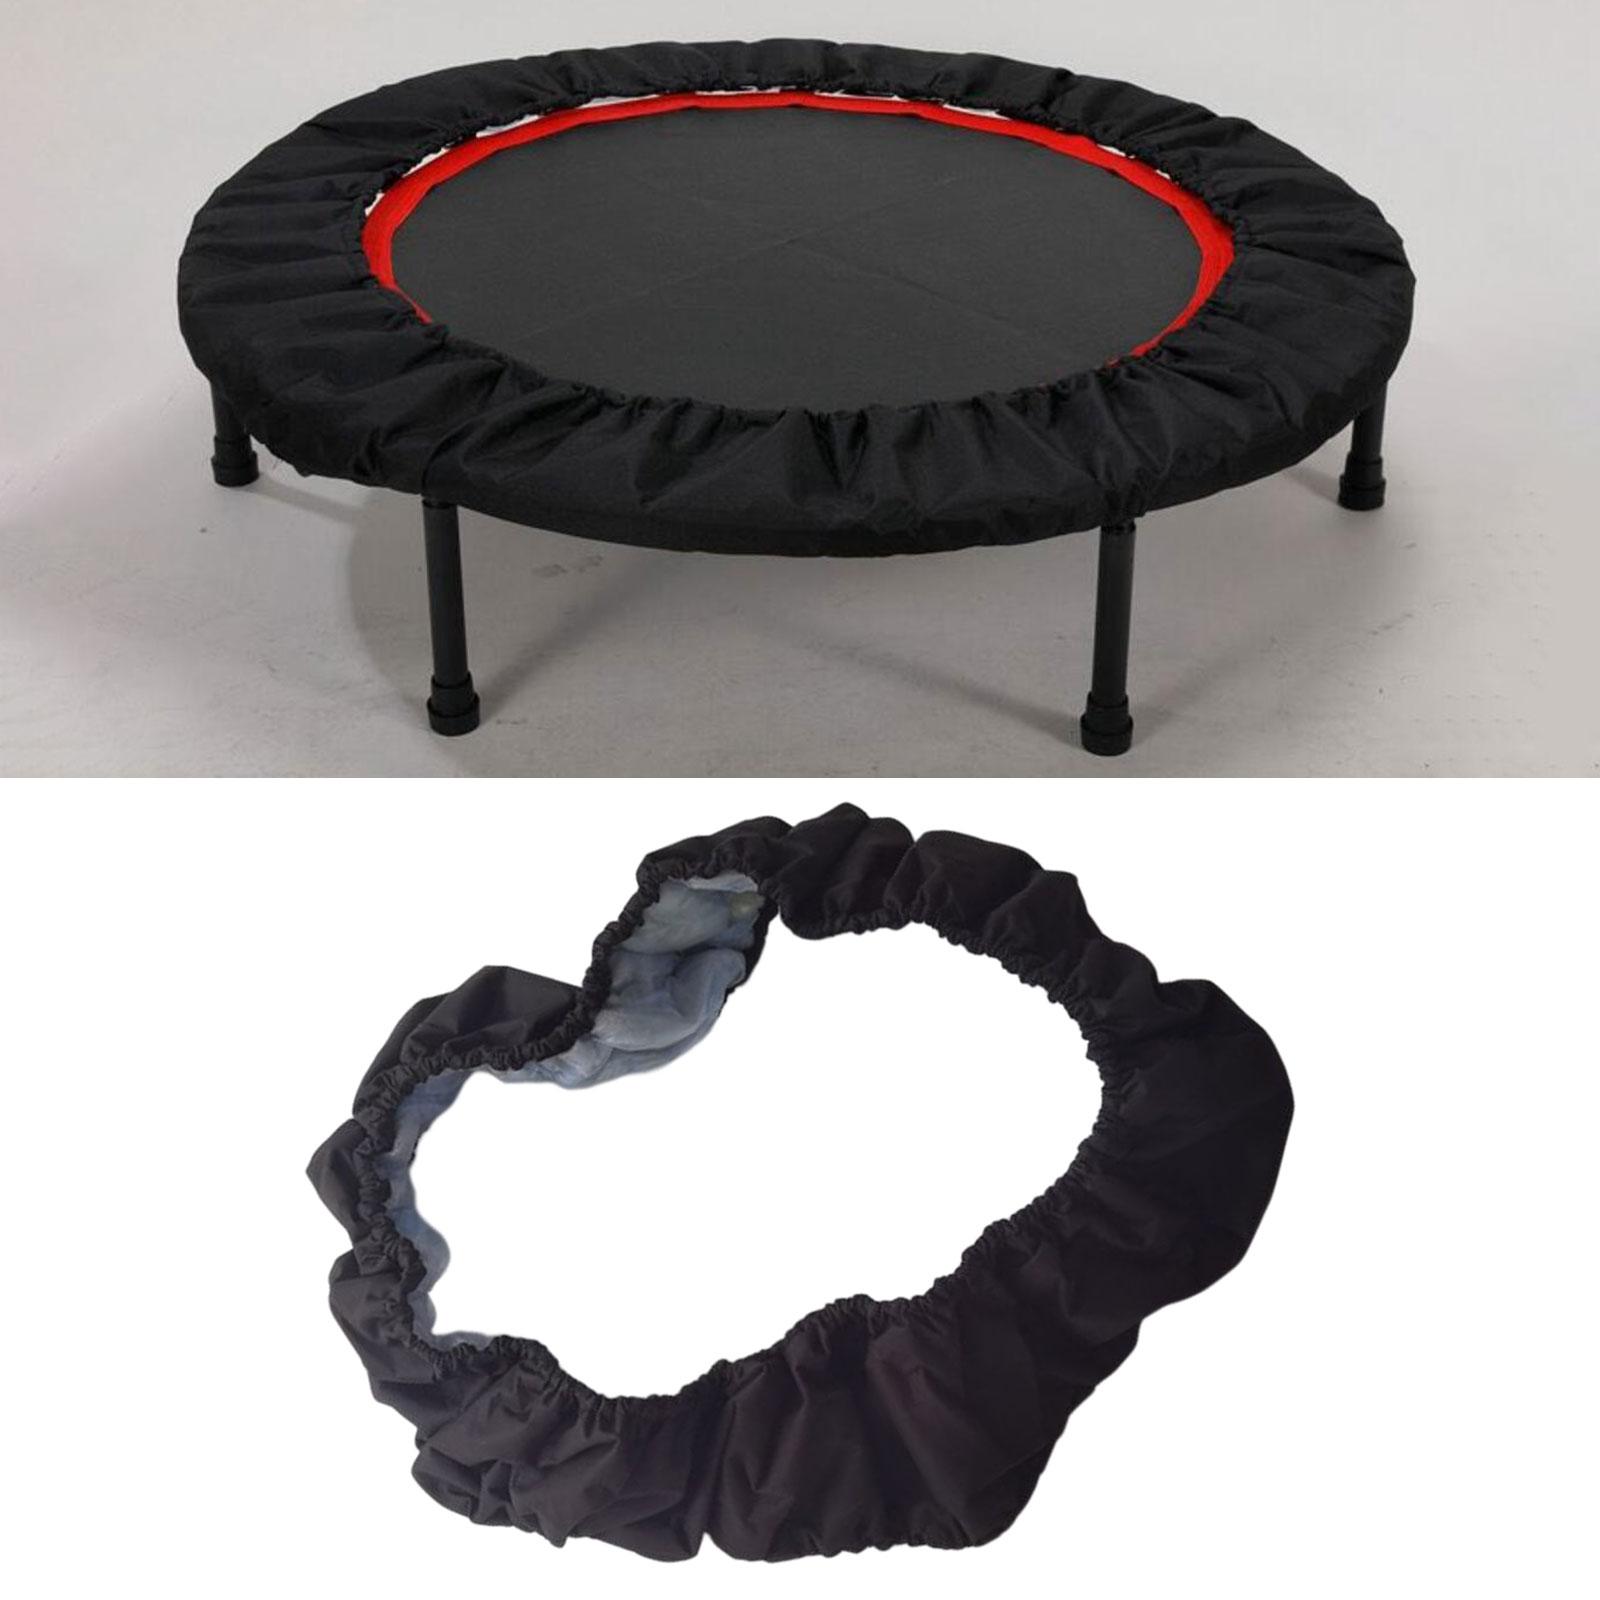 Trampoline Spring Cover Jumping Bed Cover Round Waterproof Easy to Install 38inch 8 Holes